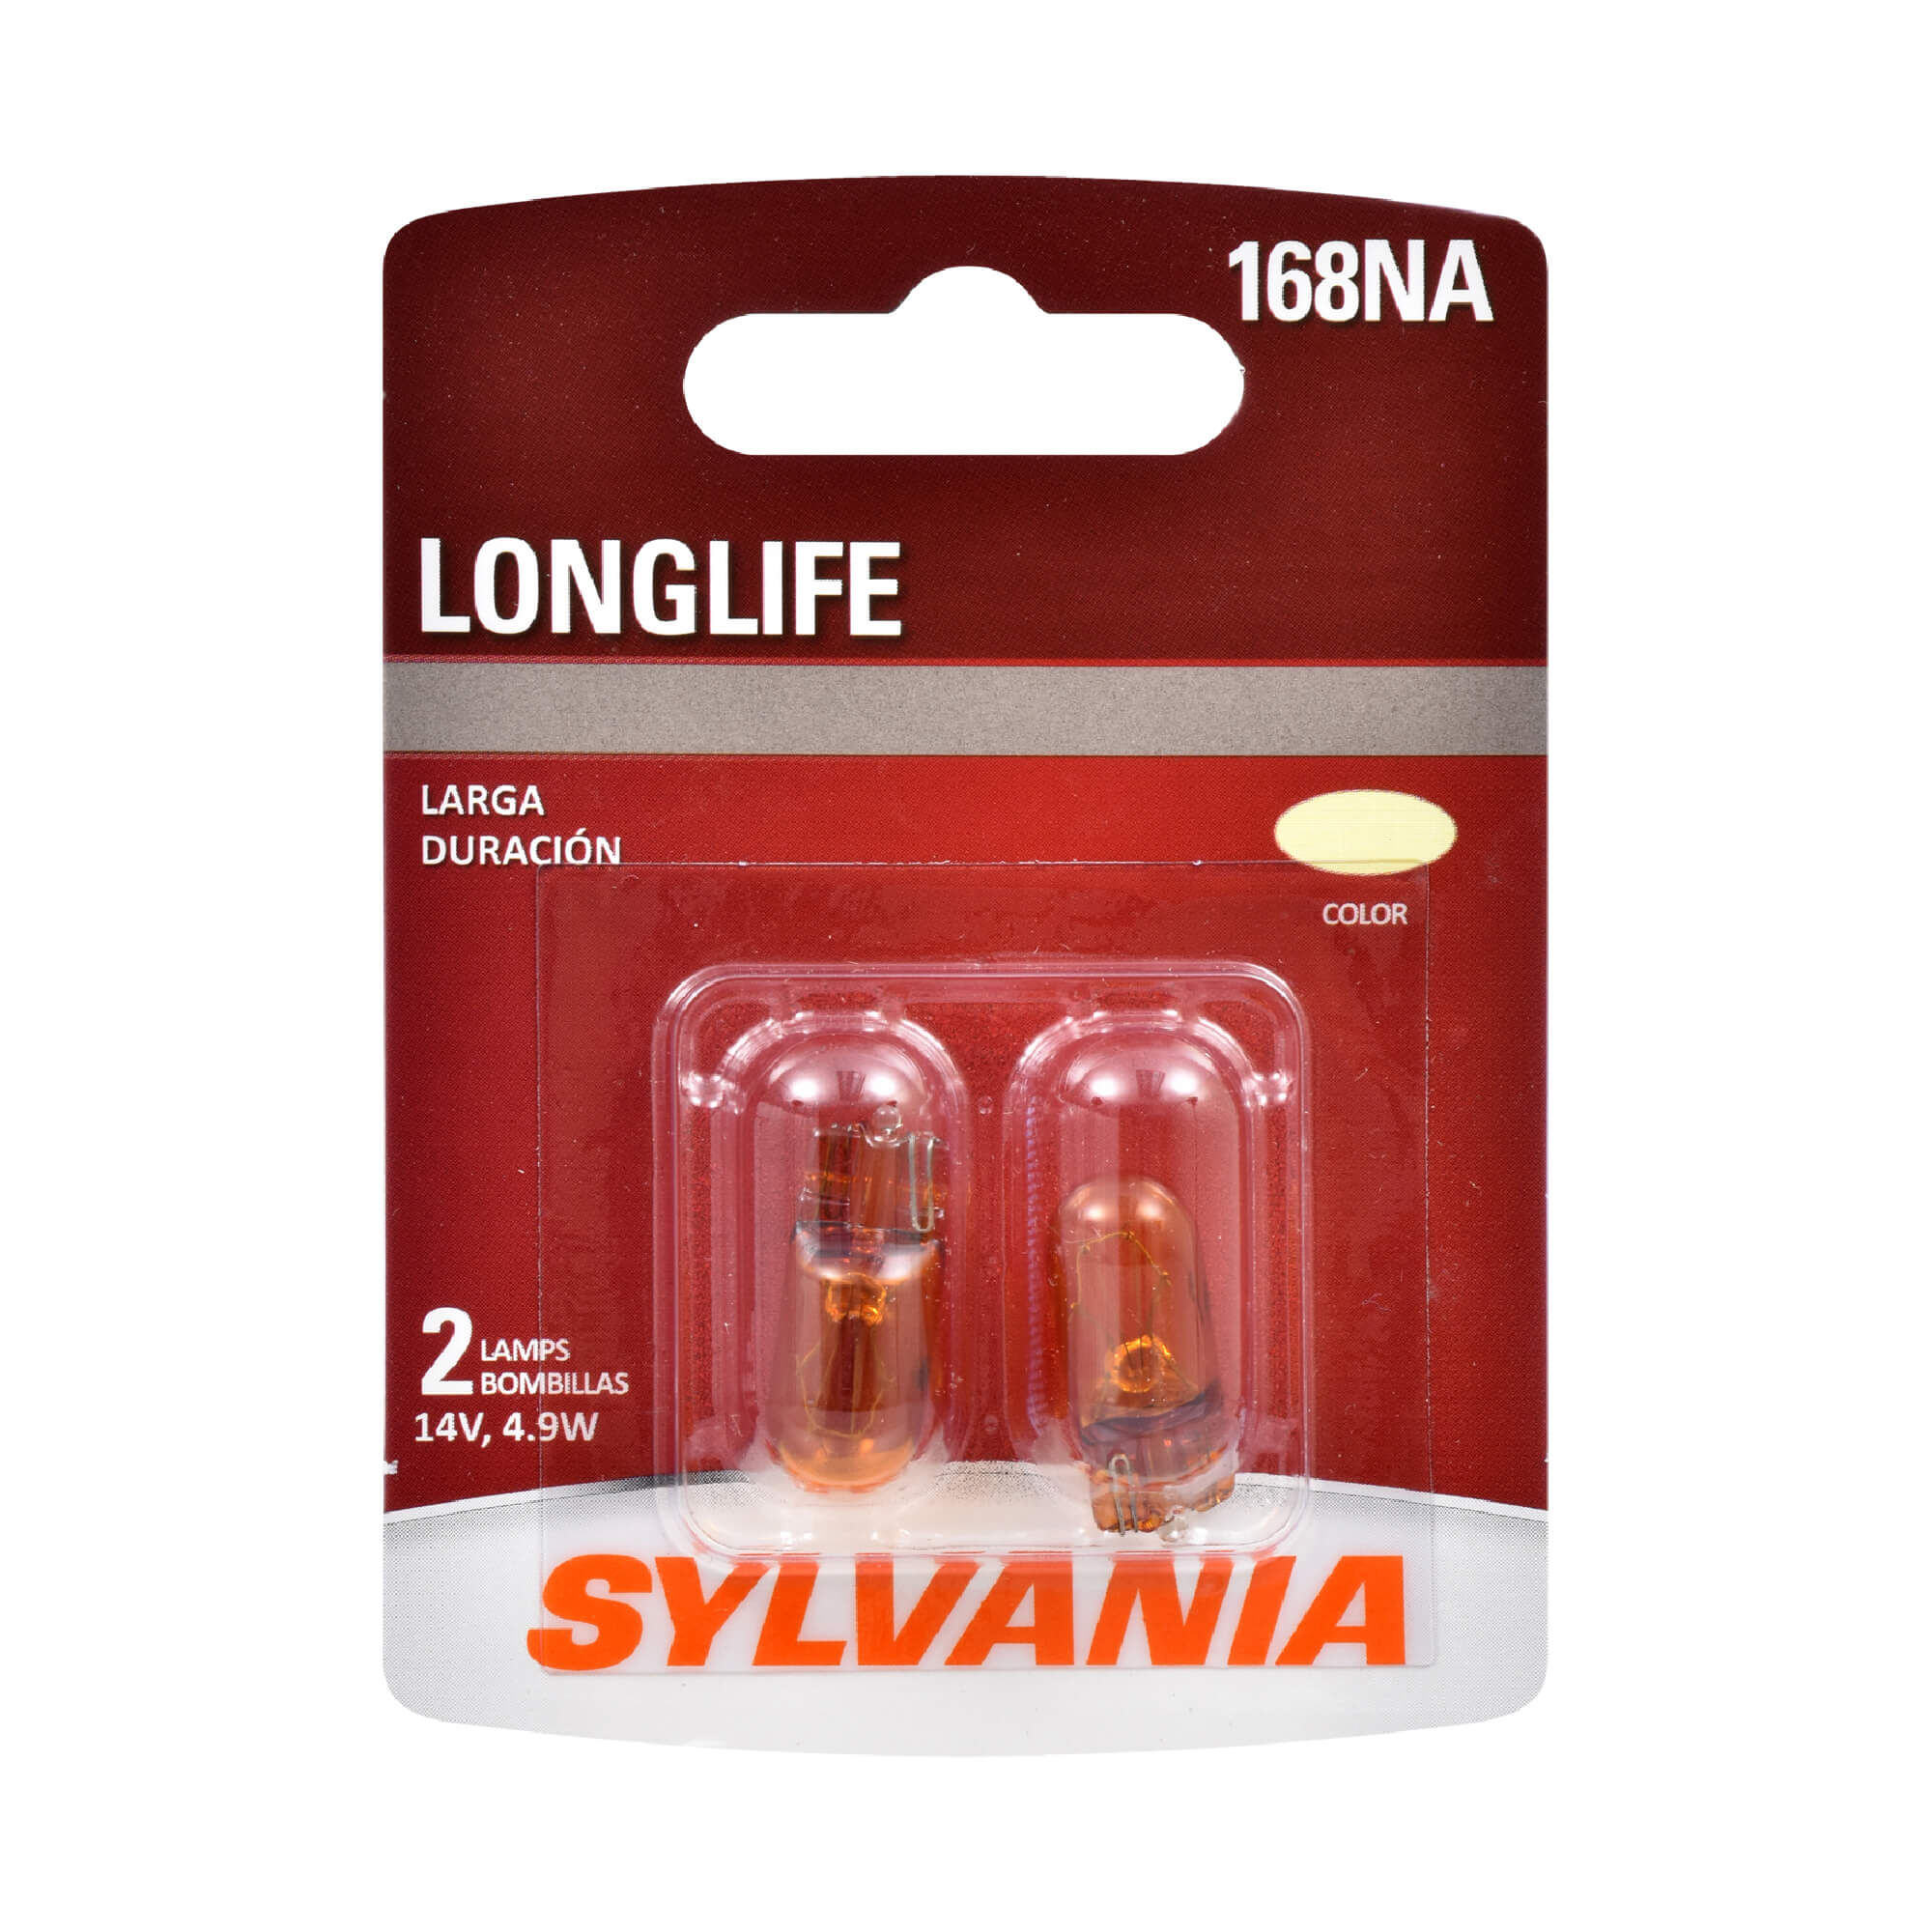 916NA Long Life Miniature Ideal for Side Marker and Parking. Contains 2 Bulbs SYLVANIA Amber Bulb 